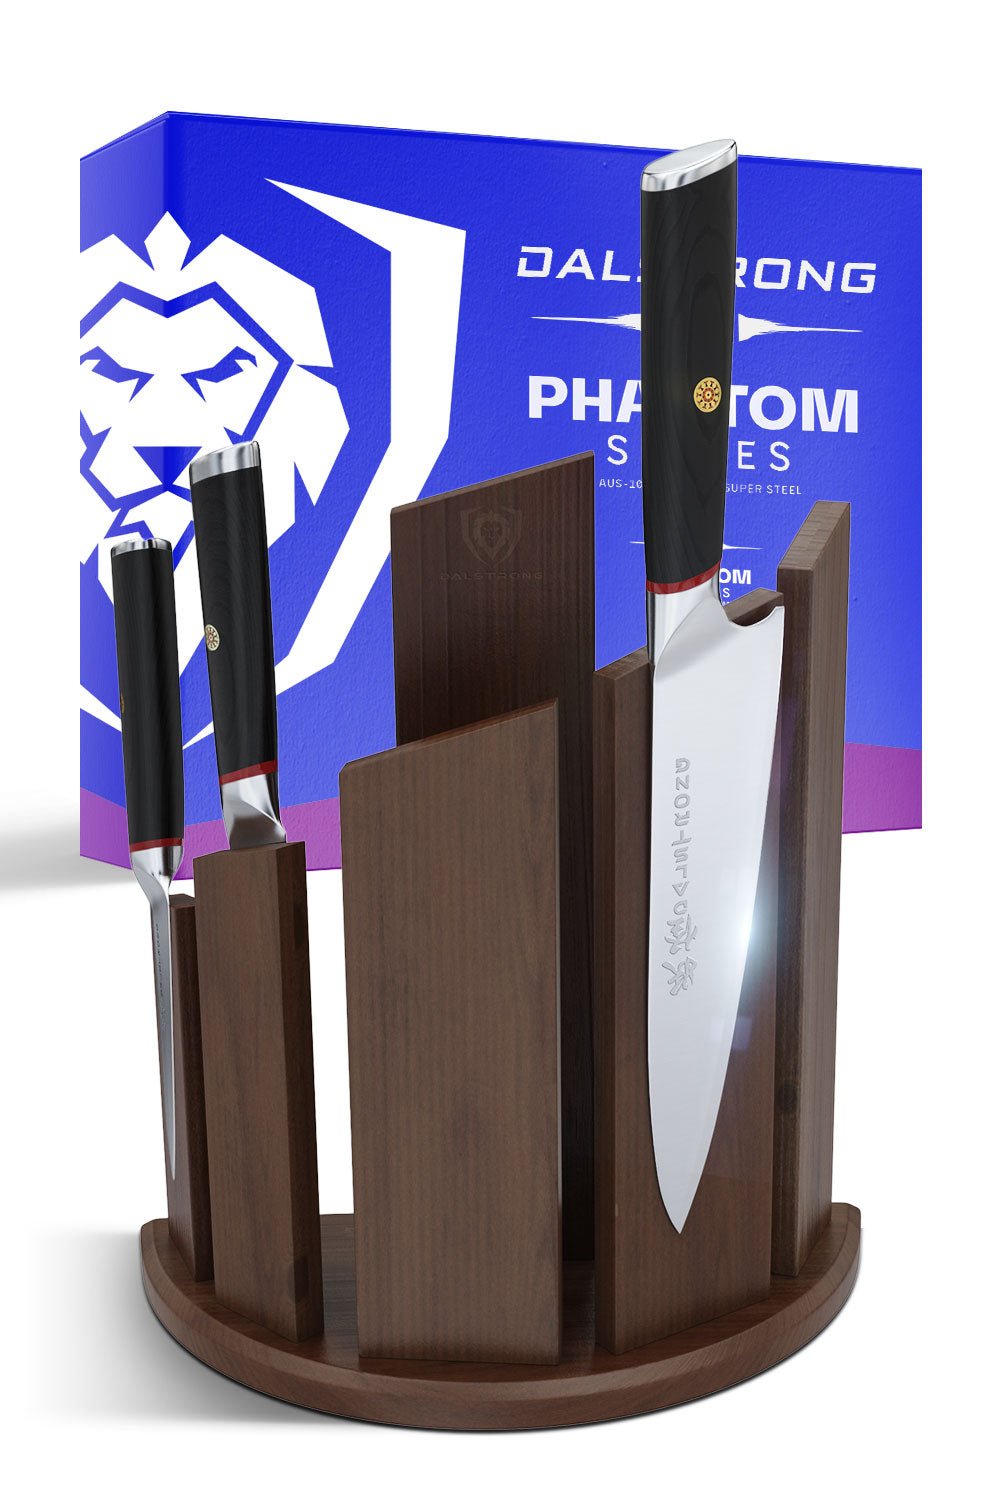 Dalstrong phantom series 6 piece knife set with dragon spire block in front of it's premium packaging.